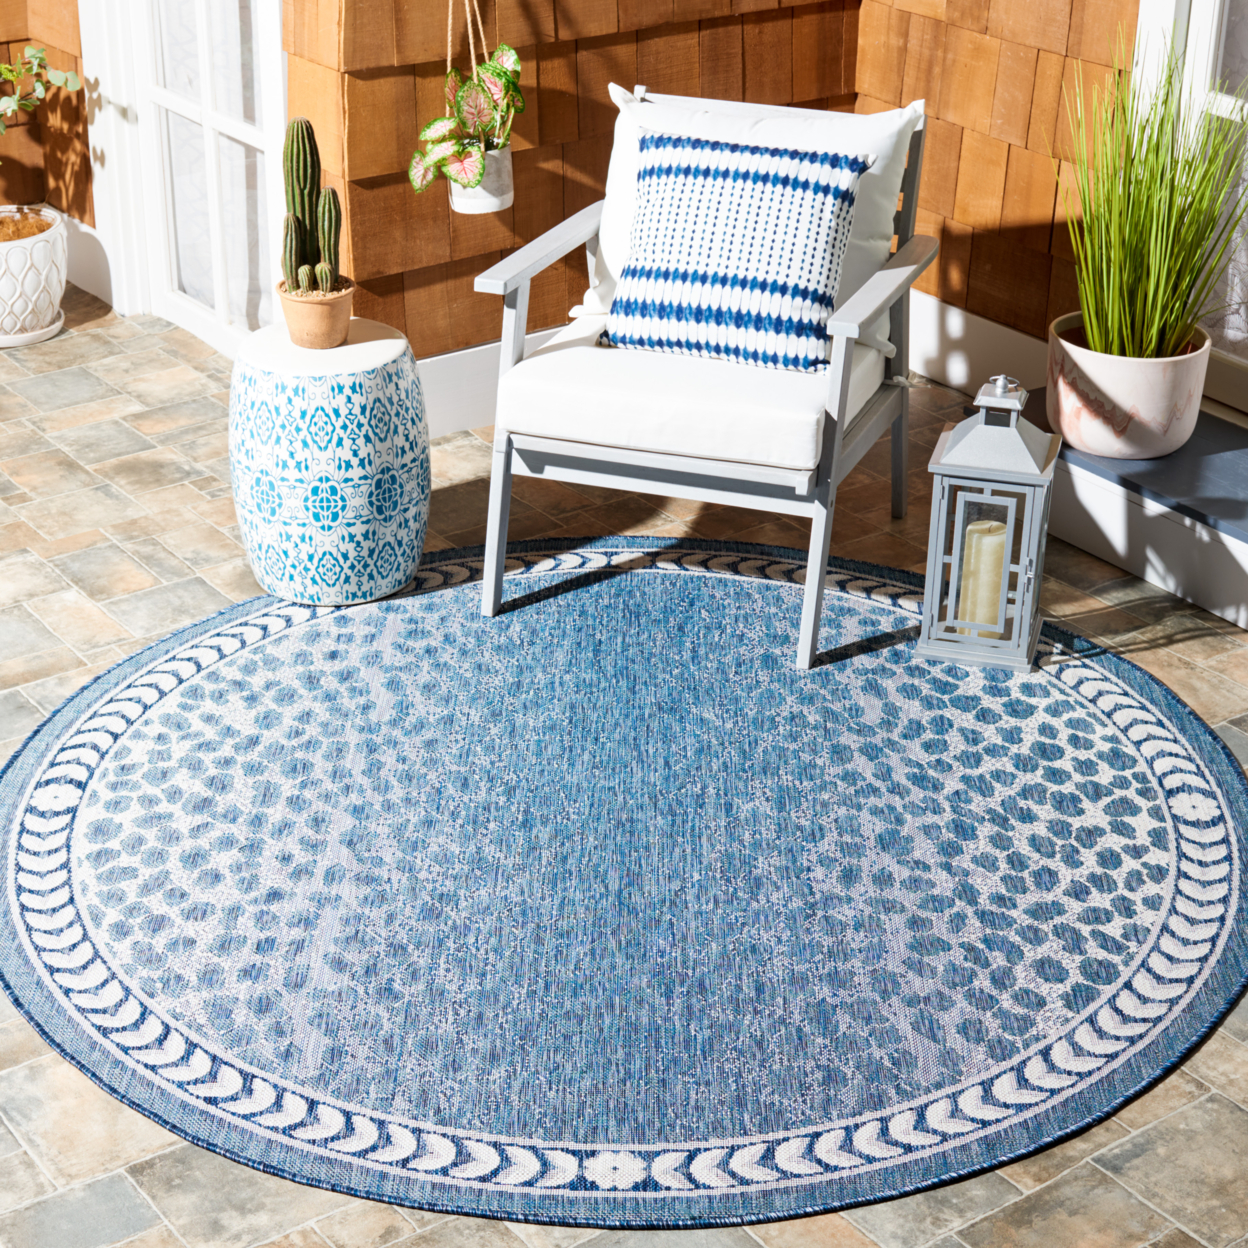 SAFAVIEH Outdoor CY8100-53412 Courtyard Blue / Ivory Rug - 6' 7 Square